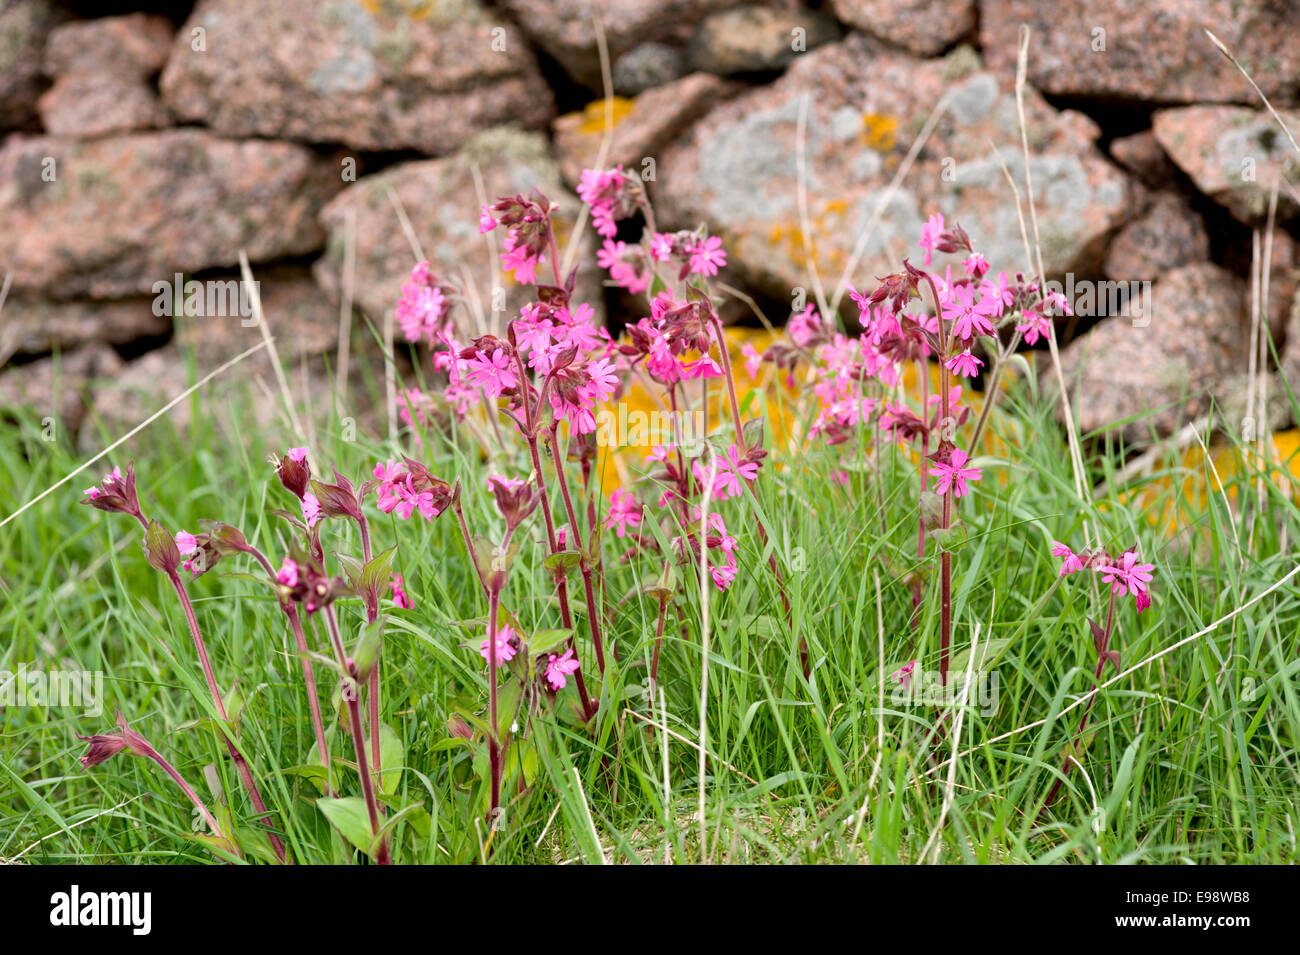 red campion flowers amongst the grass in front of a dry stone wall on the coast path from Bullers of Buchan in Aberdeenshire Stock Photo